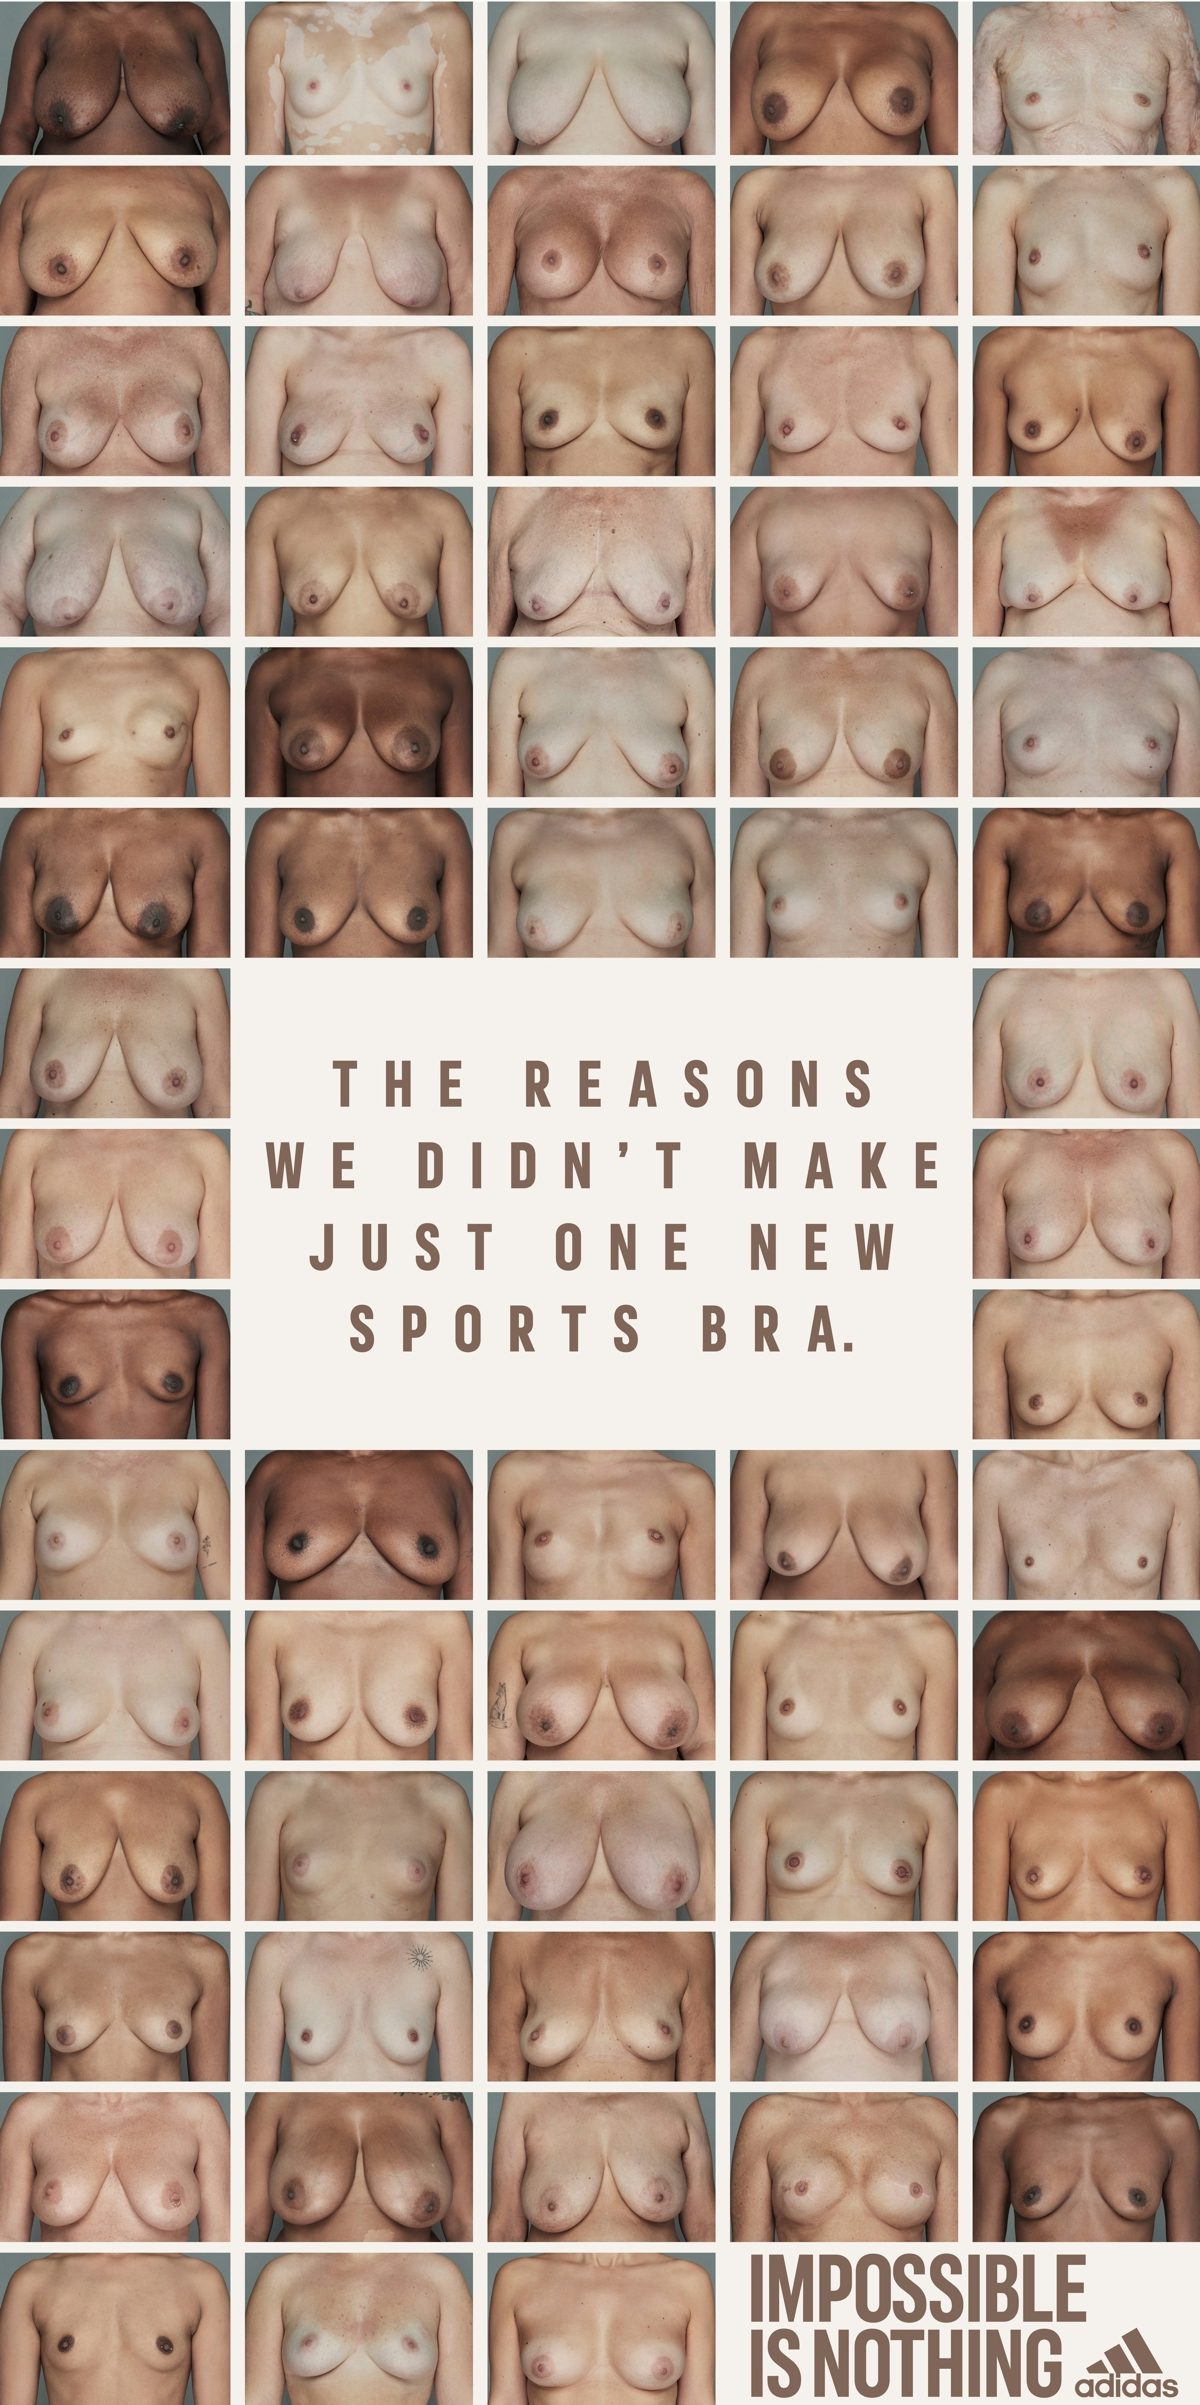 Adidas Women Porn - Adidas created a gallery of naked breasts to launch its sports bra range